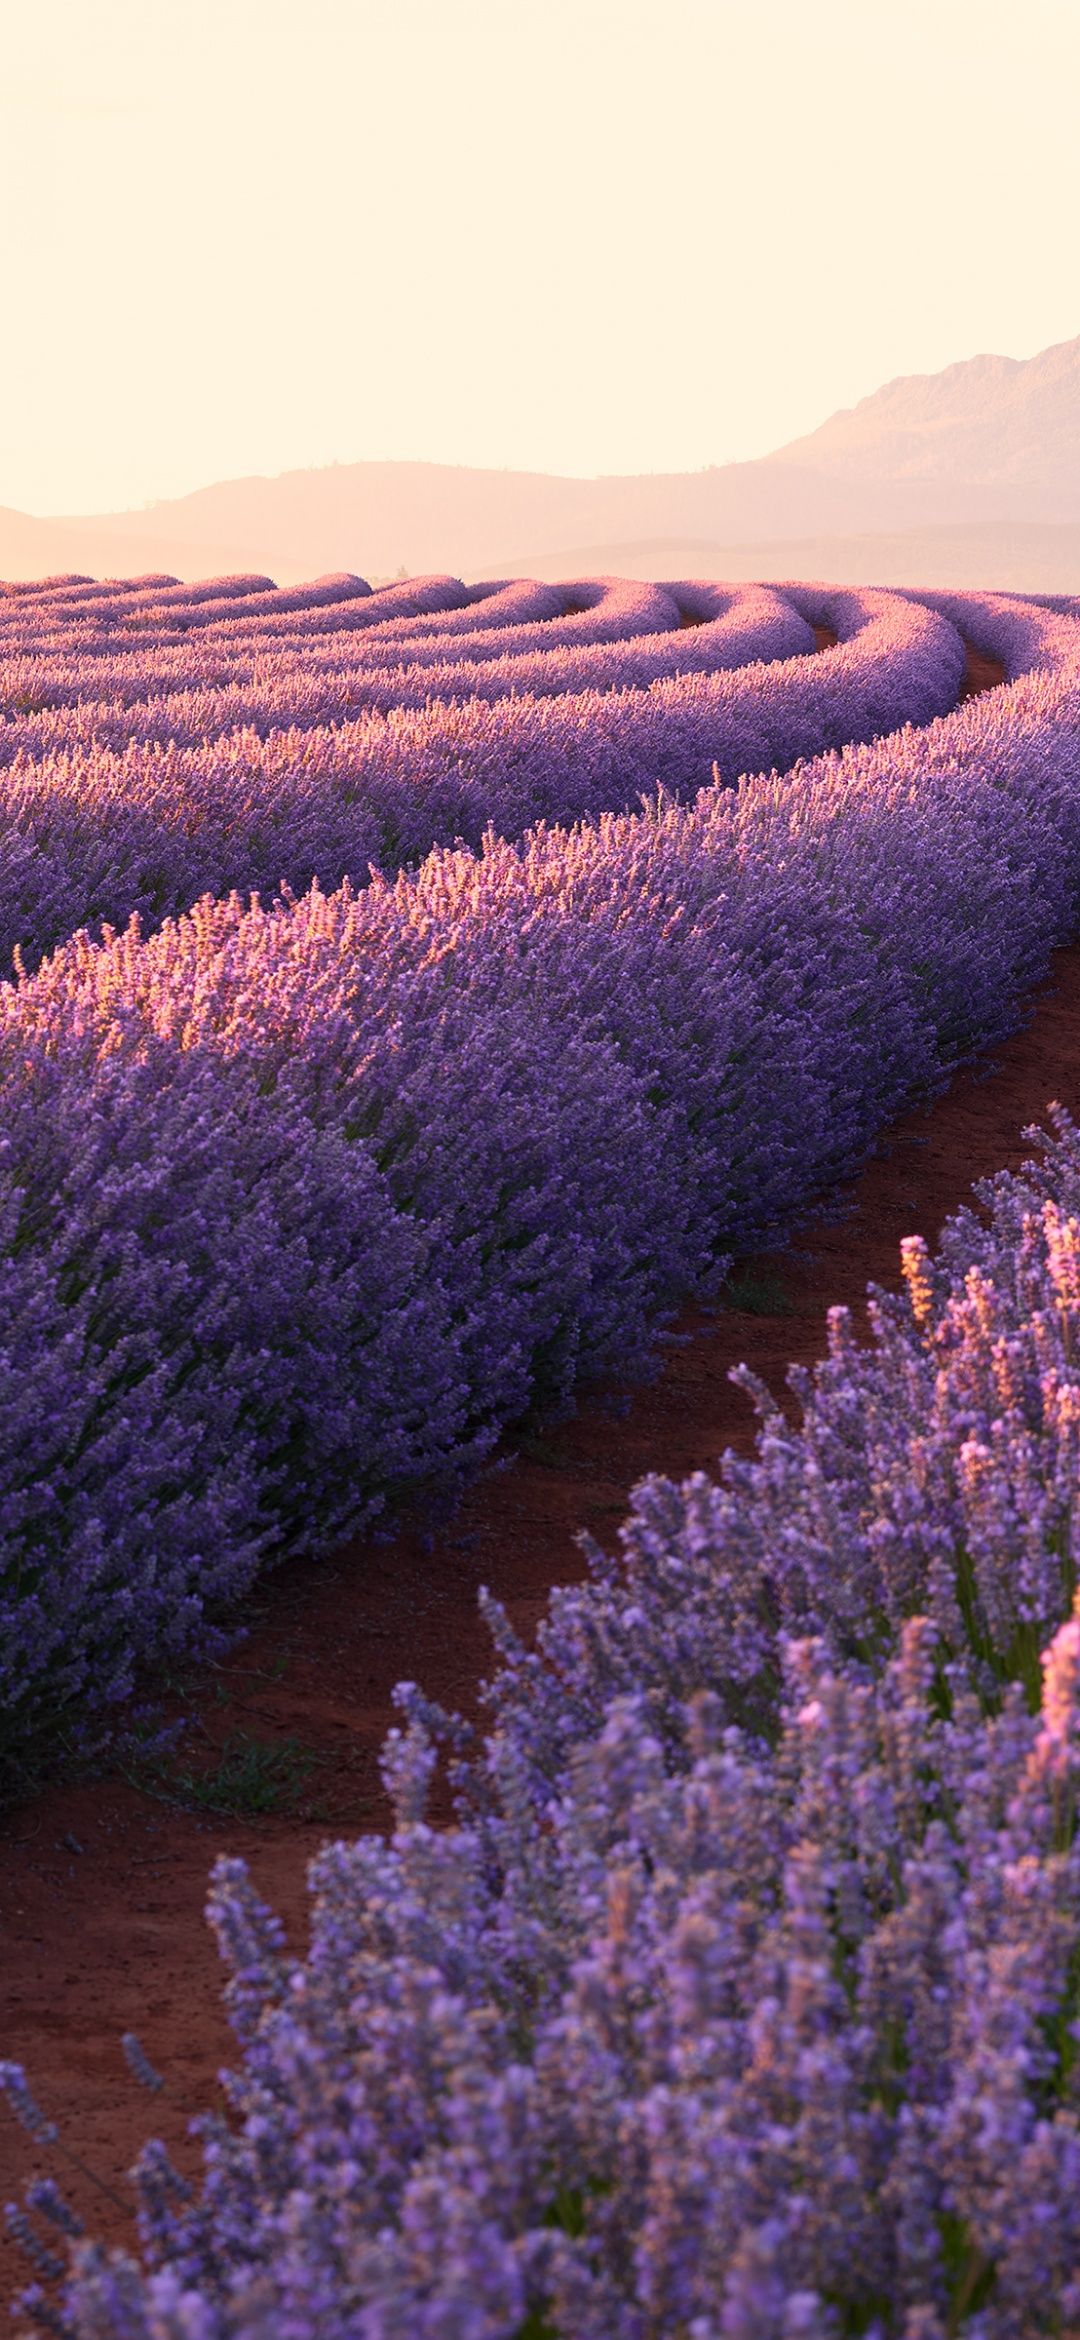 A field of purple flowers in the sunset - Lavender, flower